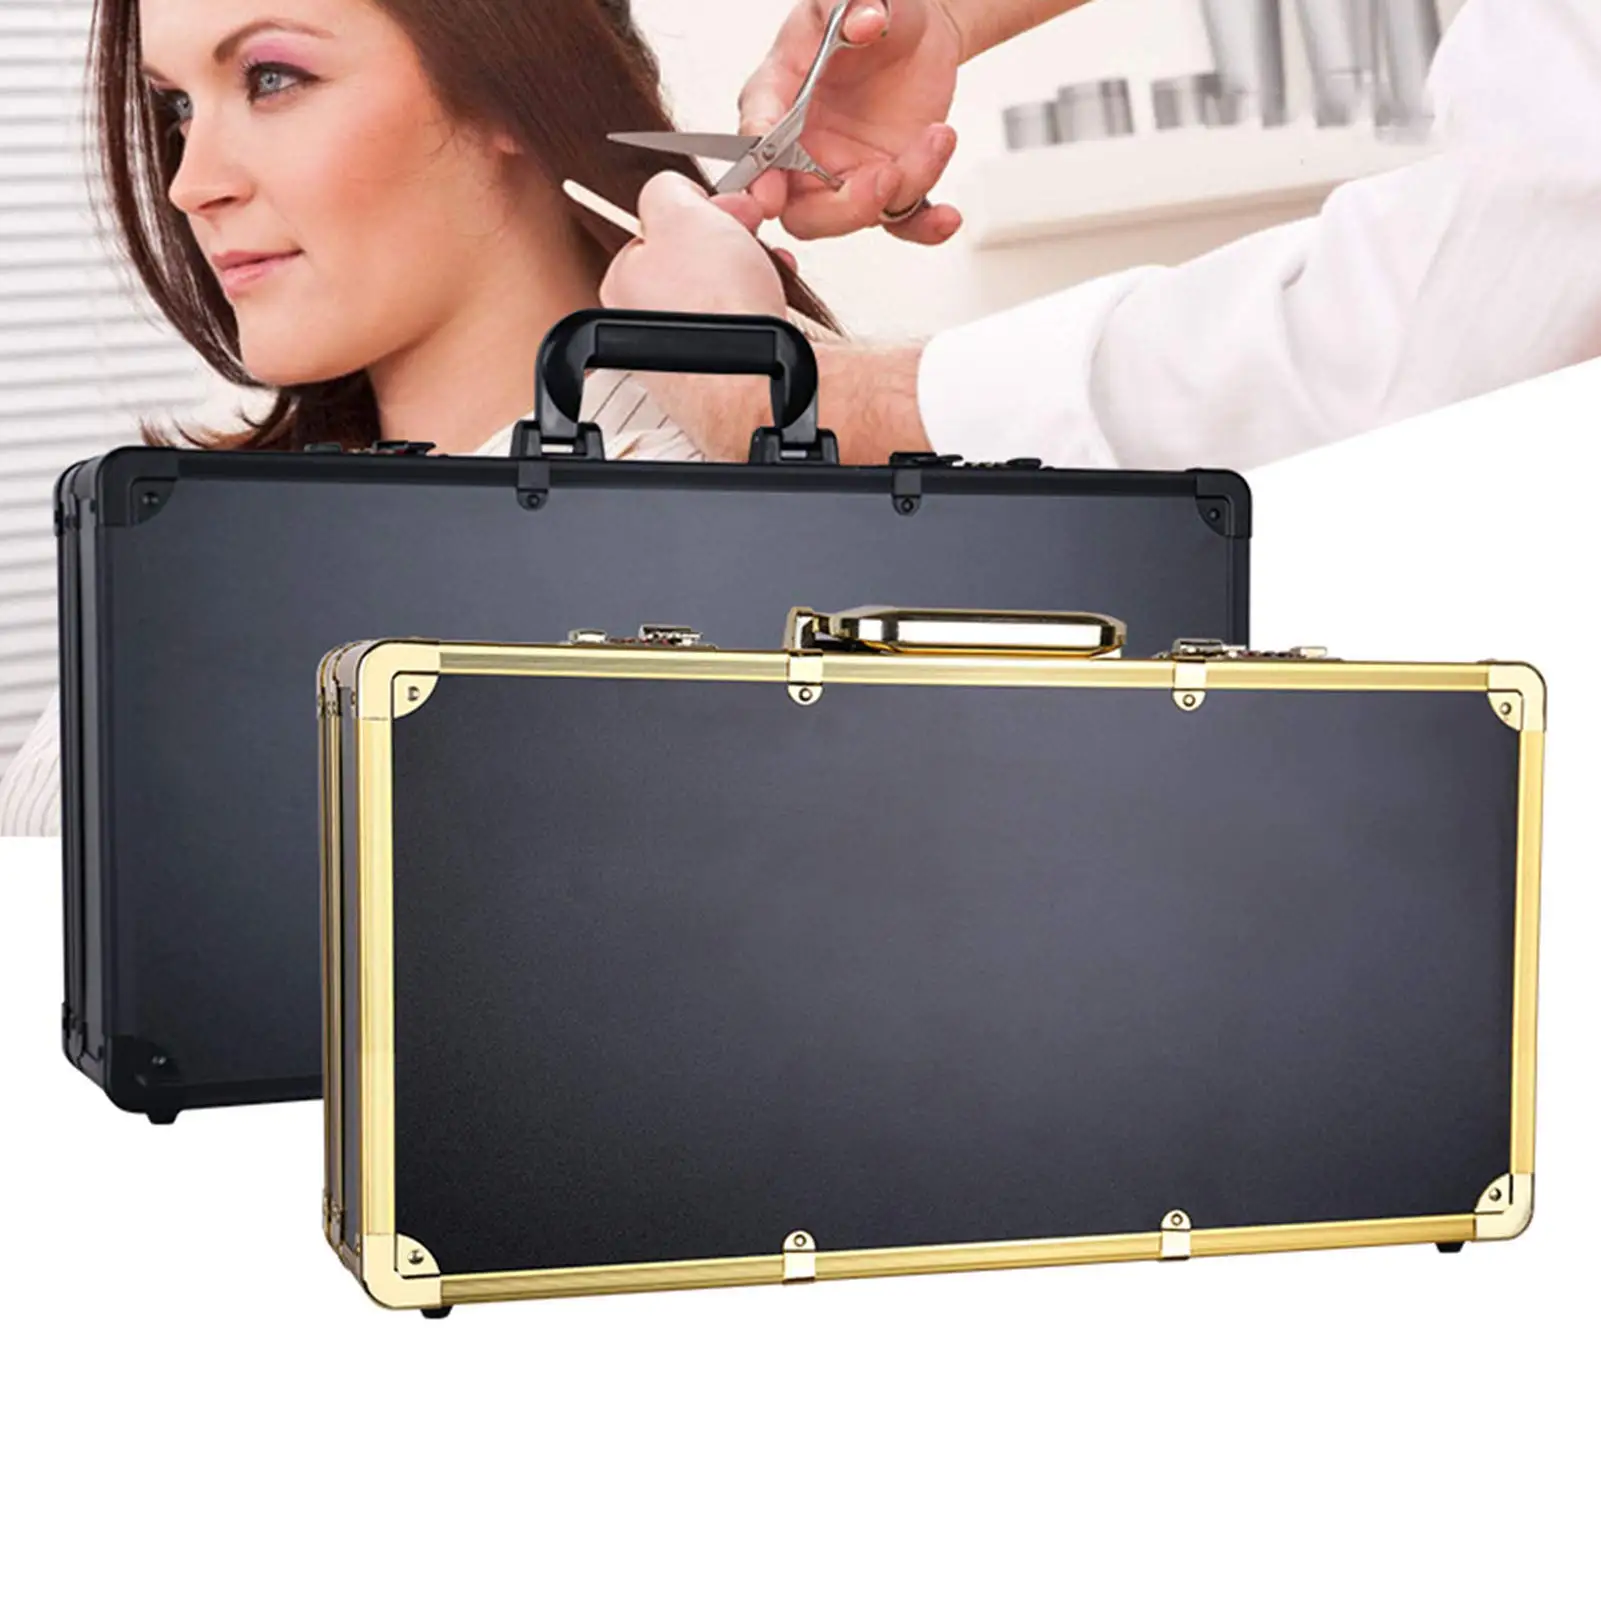 Professional Barber Aluminum Case Hairdressing Toolbox Large Capacity Travel Suitcase With Combination Lock Cosmetic Box 1 3 piece suitcase luggage sets abs hardside suitcase set tsa lock carry on luggage travel suitcase with spinner wheel